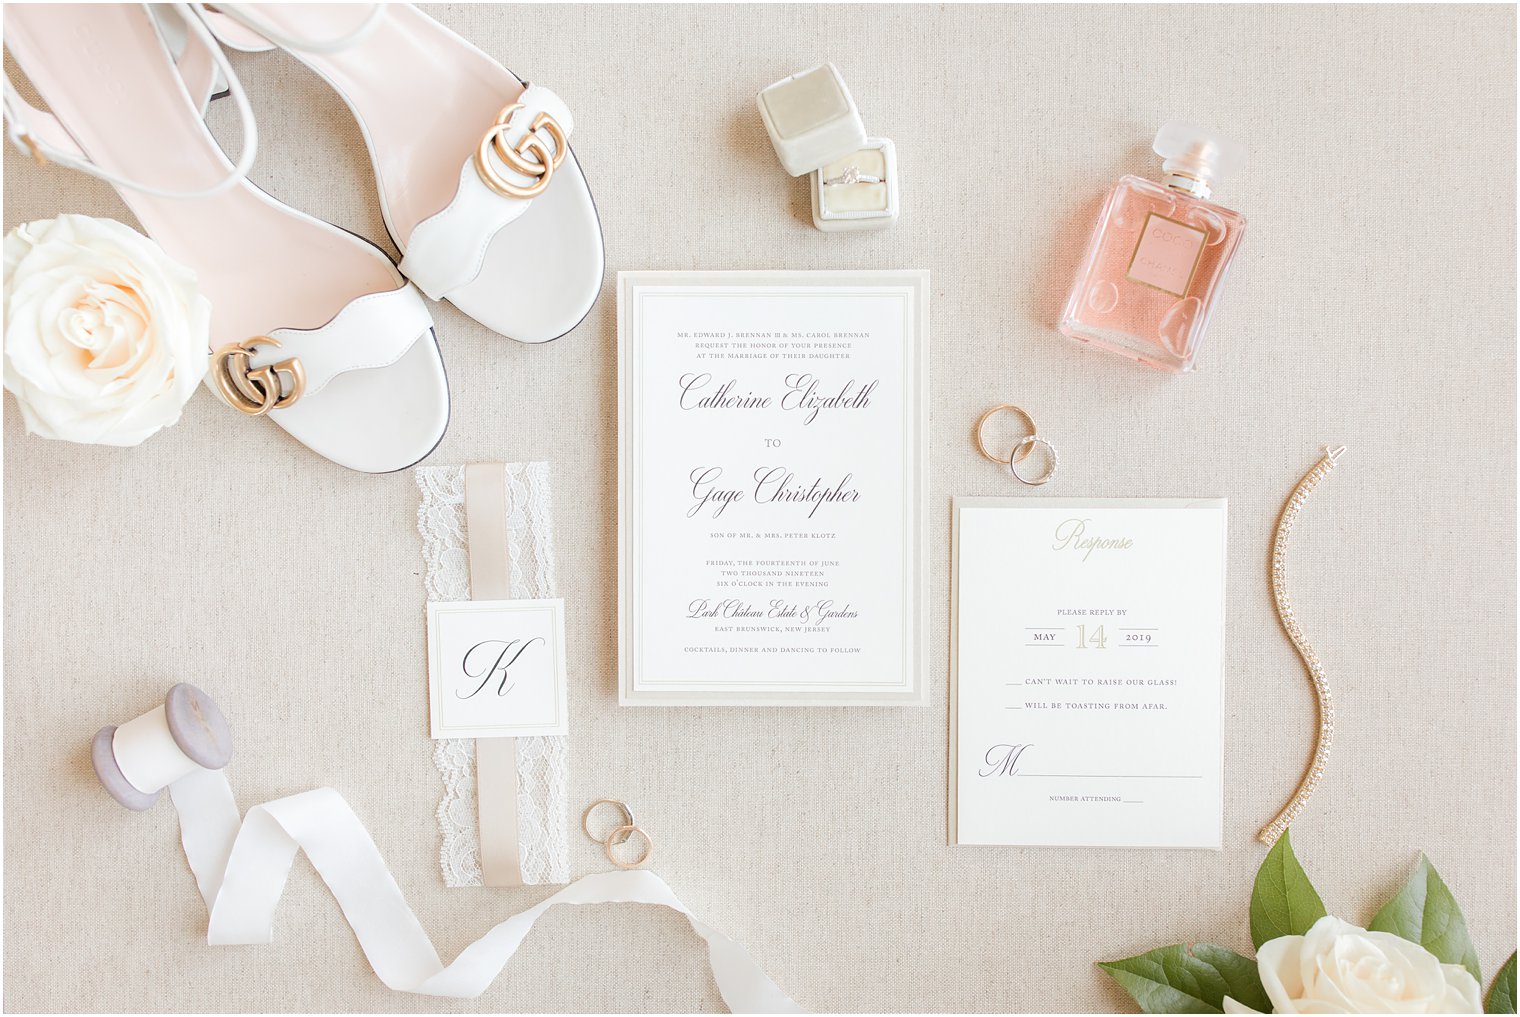 trendy wedding colors: gold and white invitation suite 